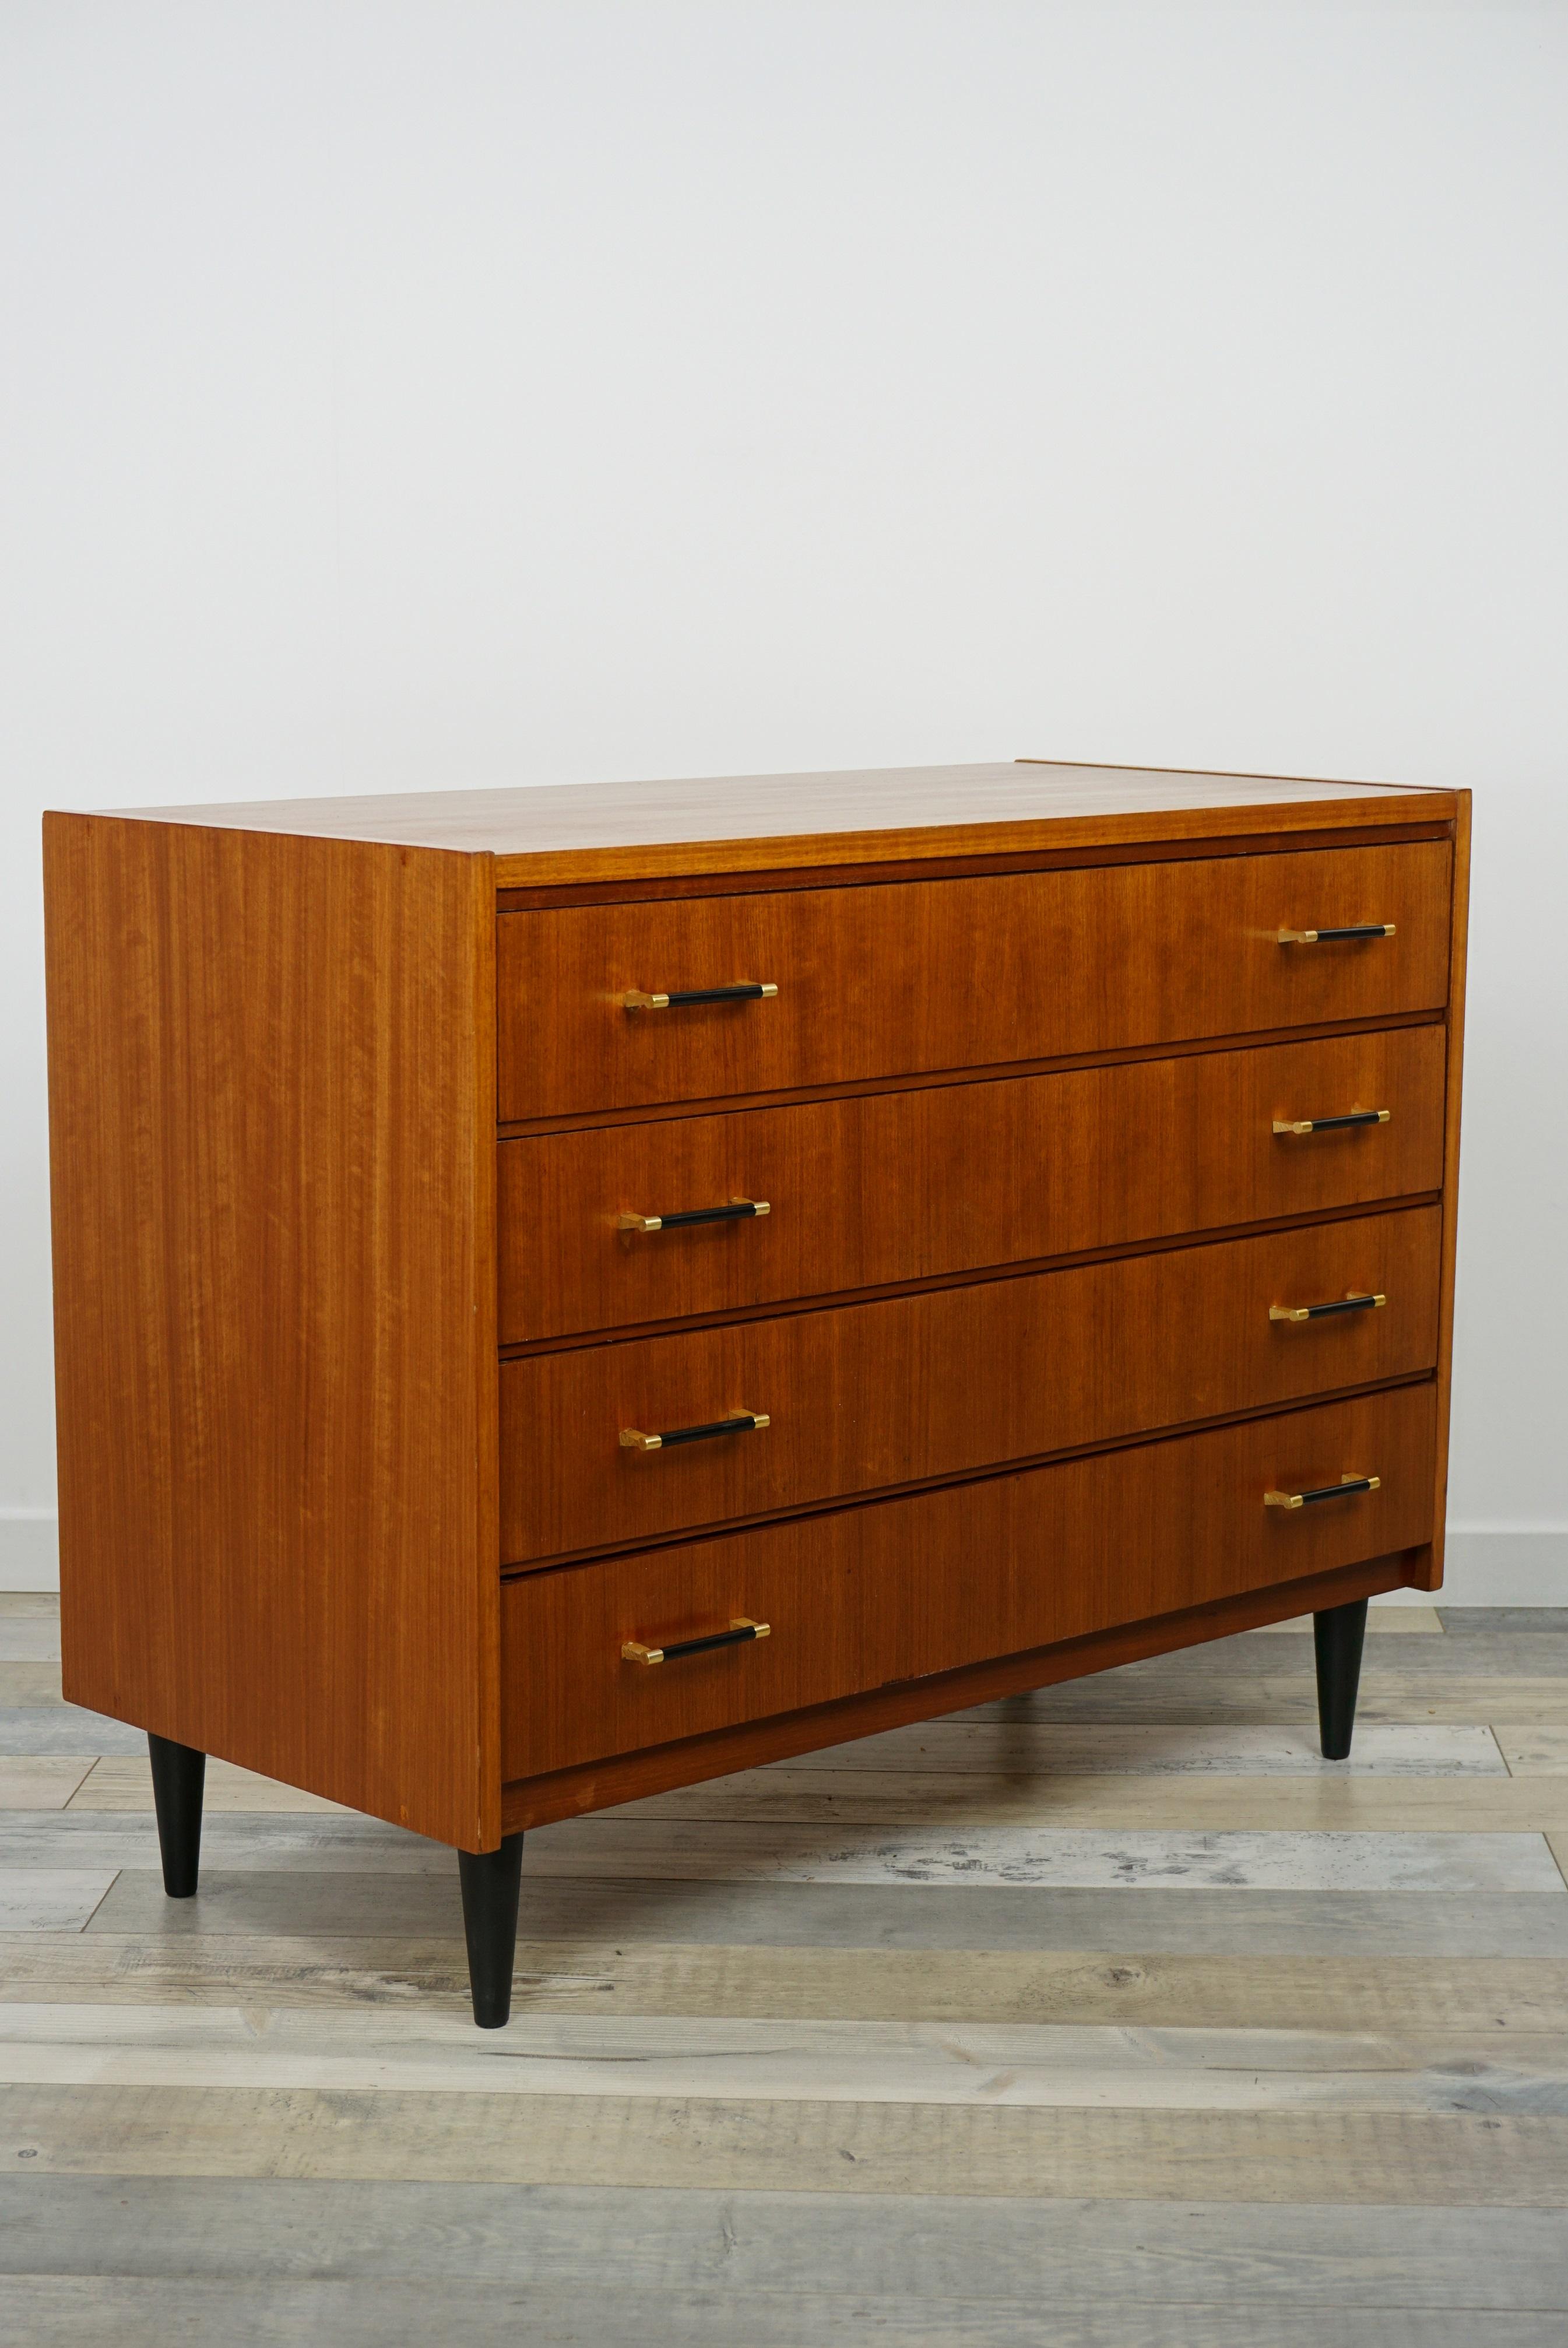 Teak wooden chest of drawers Scandinavian design from the 1960s, beautiful and practical. Sign of Fine, delicate and quality work: its brass handles and compass feet. All in excellent condition.